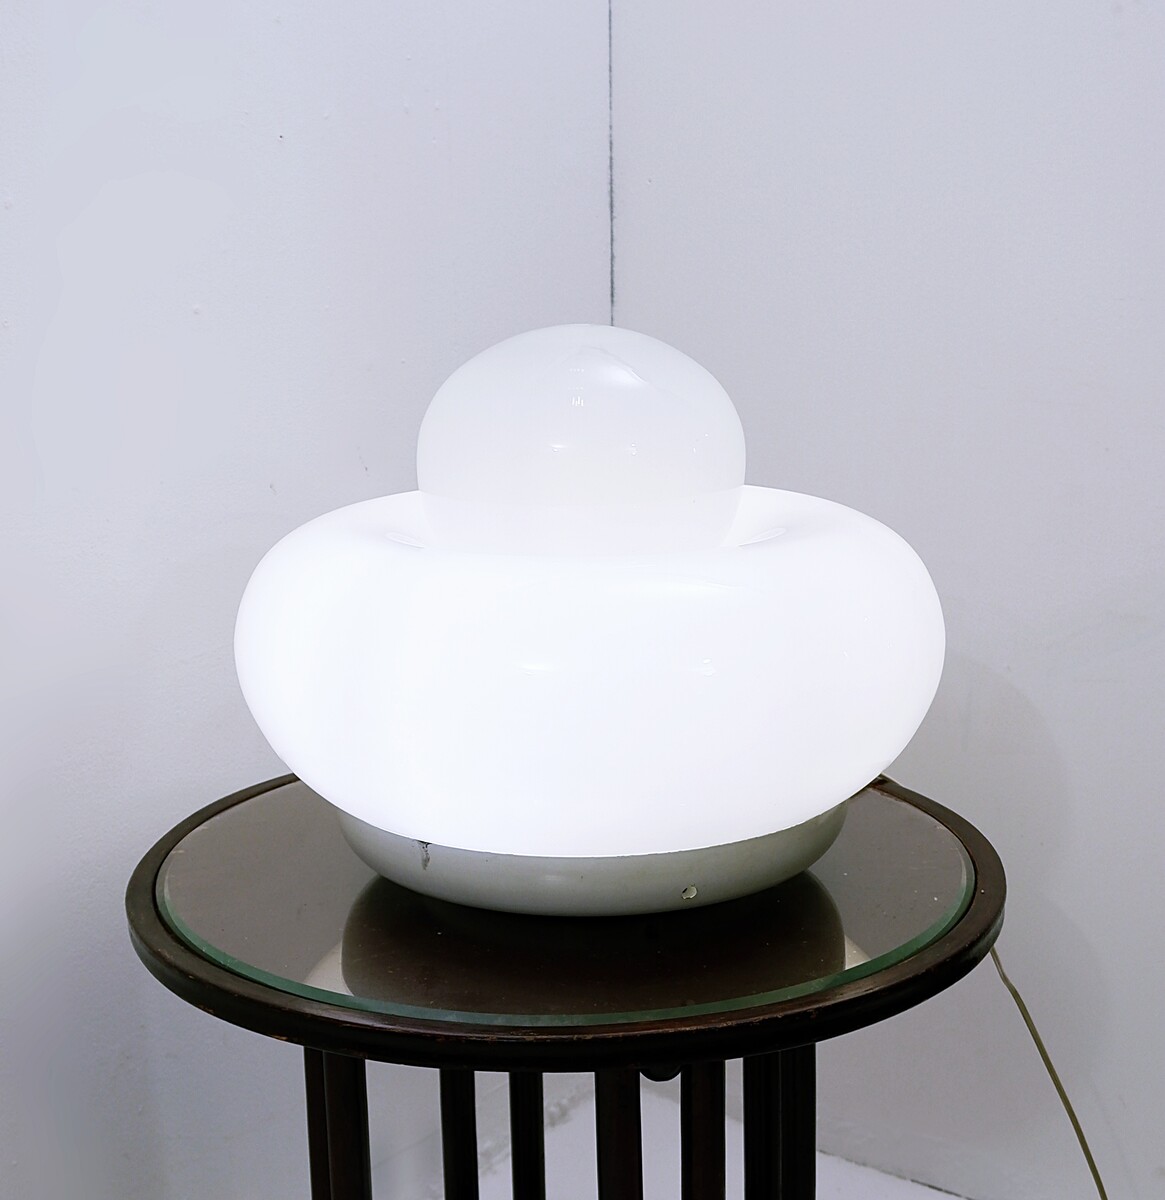 Electra Lamp by Giuliana Gramigna for Artemide, 1960s for sale at Pamono